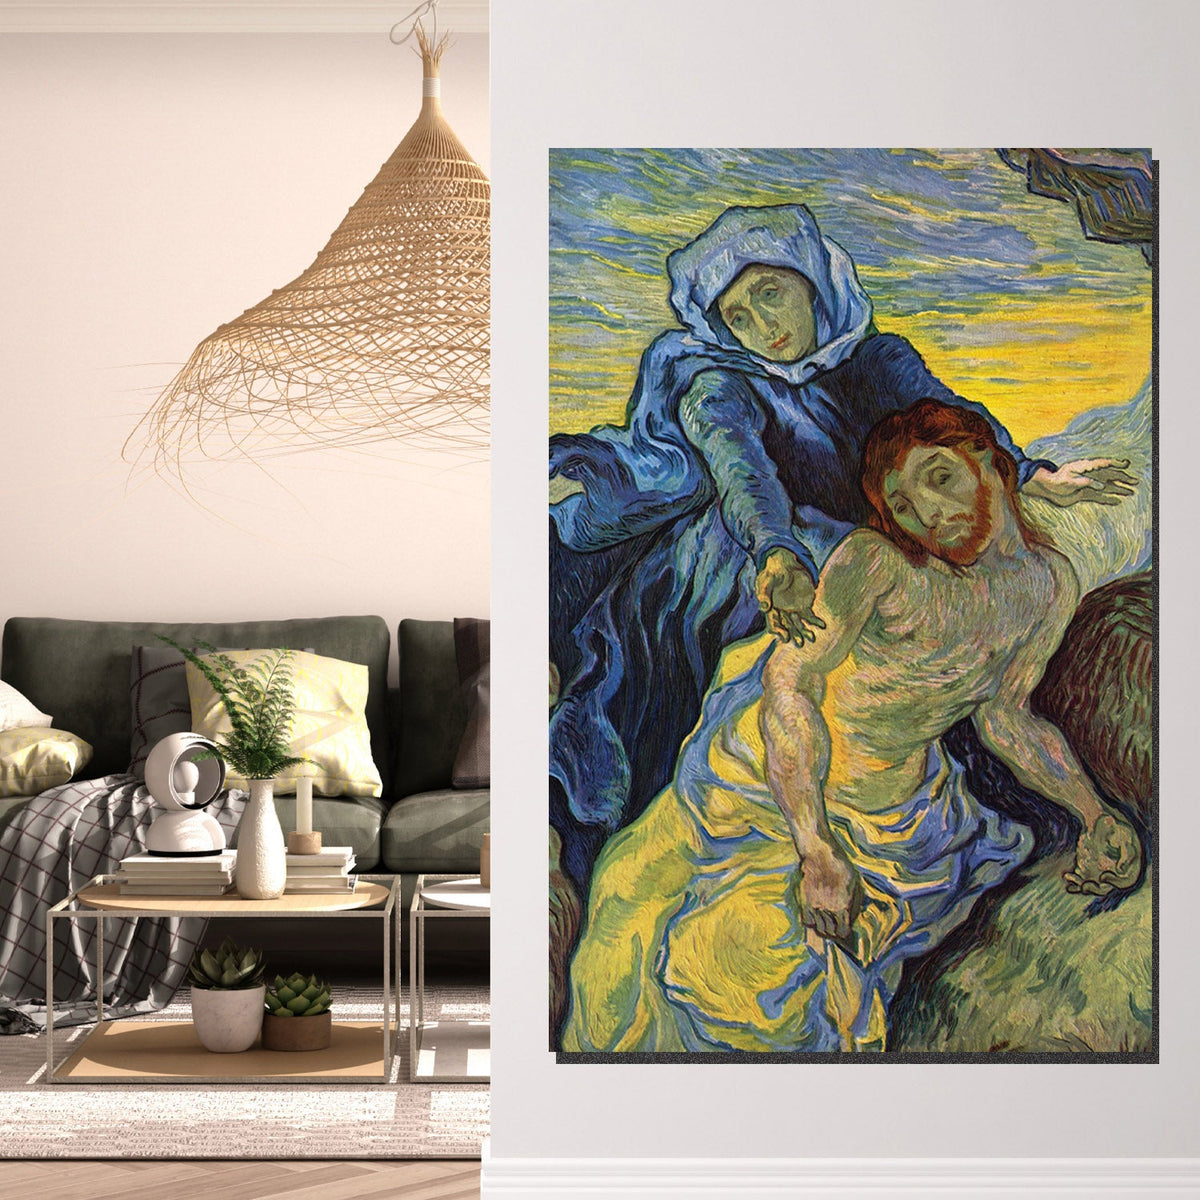 https://cdn.shopify.com/s/files/1/0387/9986/8044/products/ThePietabyVanGoghCanvasArtPrintStretched-4.jpg